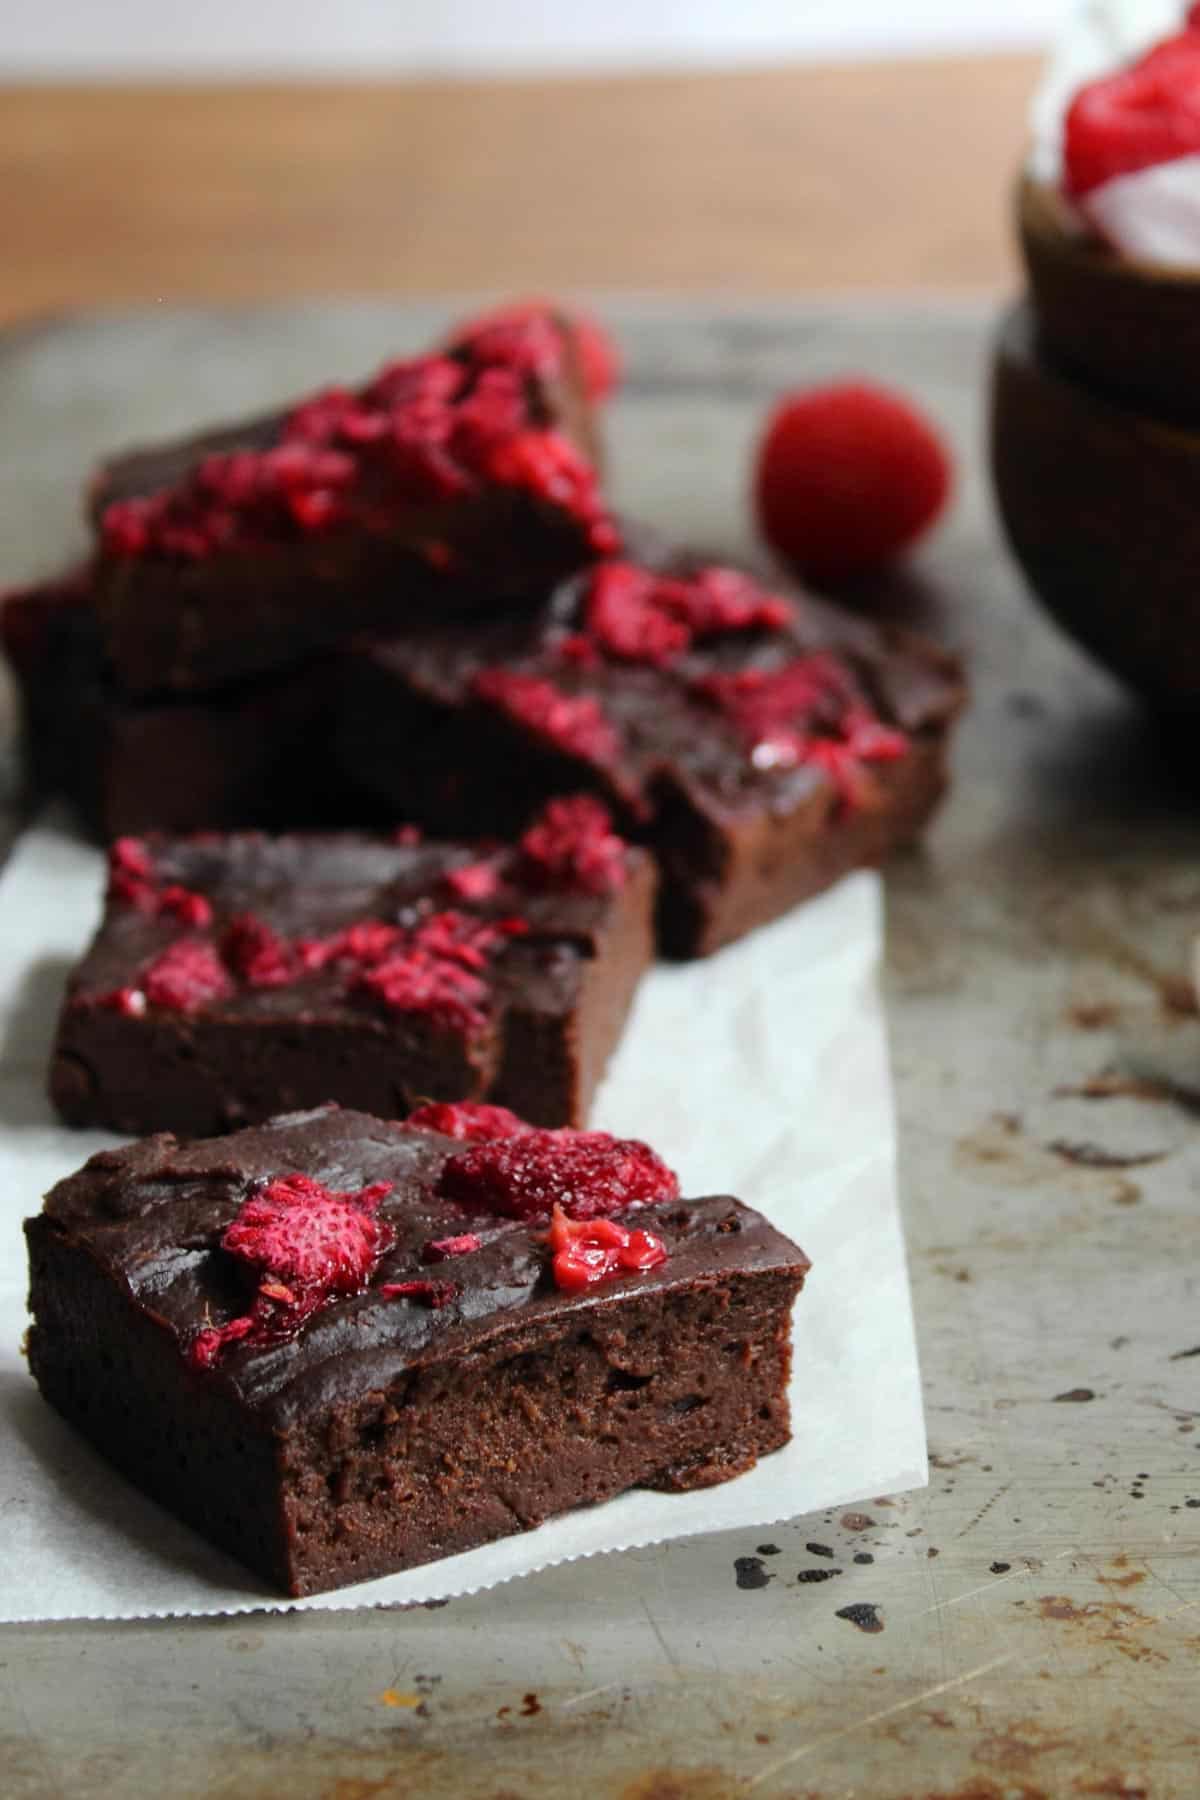 healthy chocolate brownies arranged on a baking tray with raspberries.